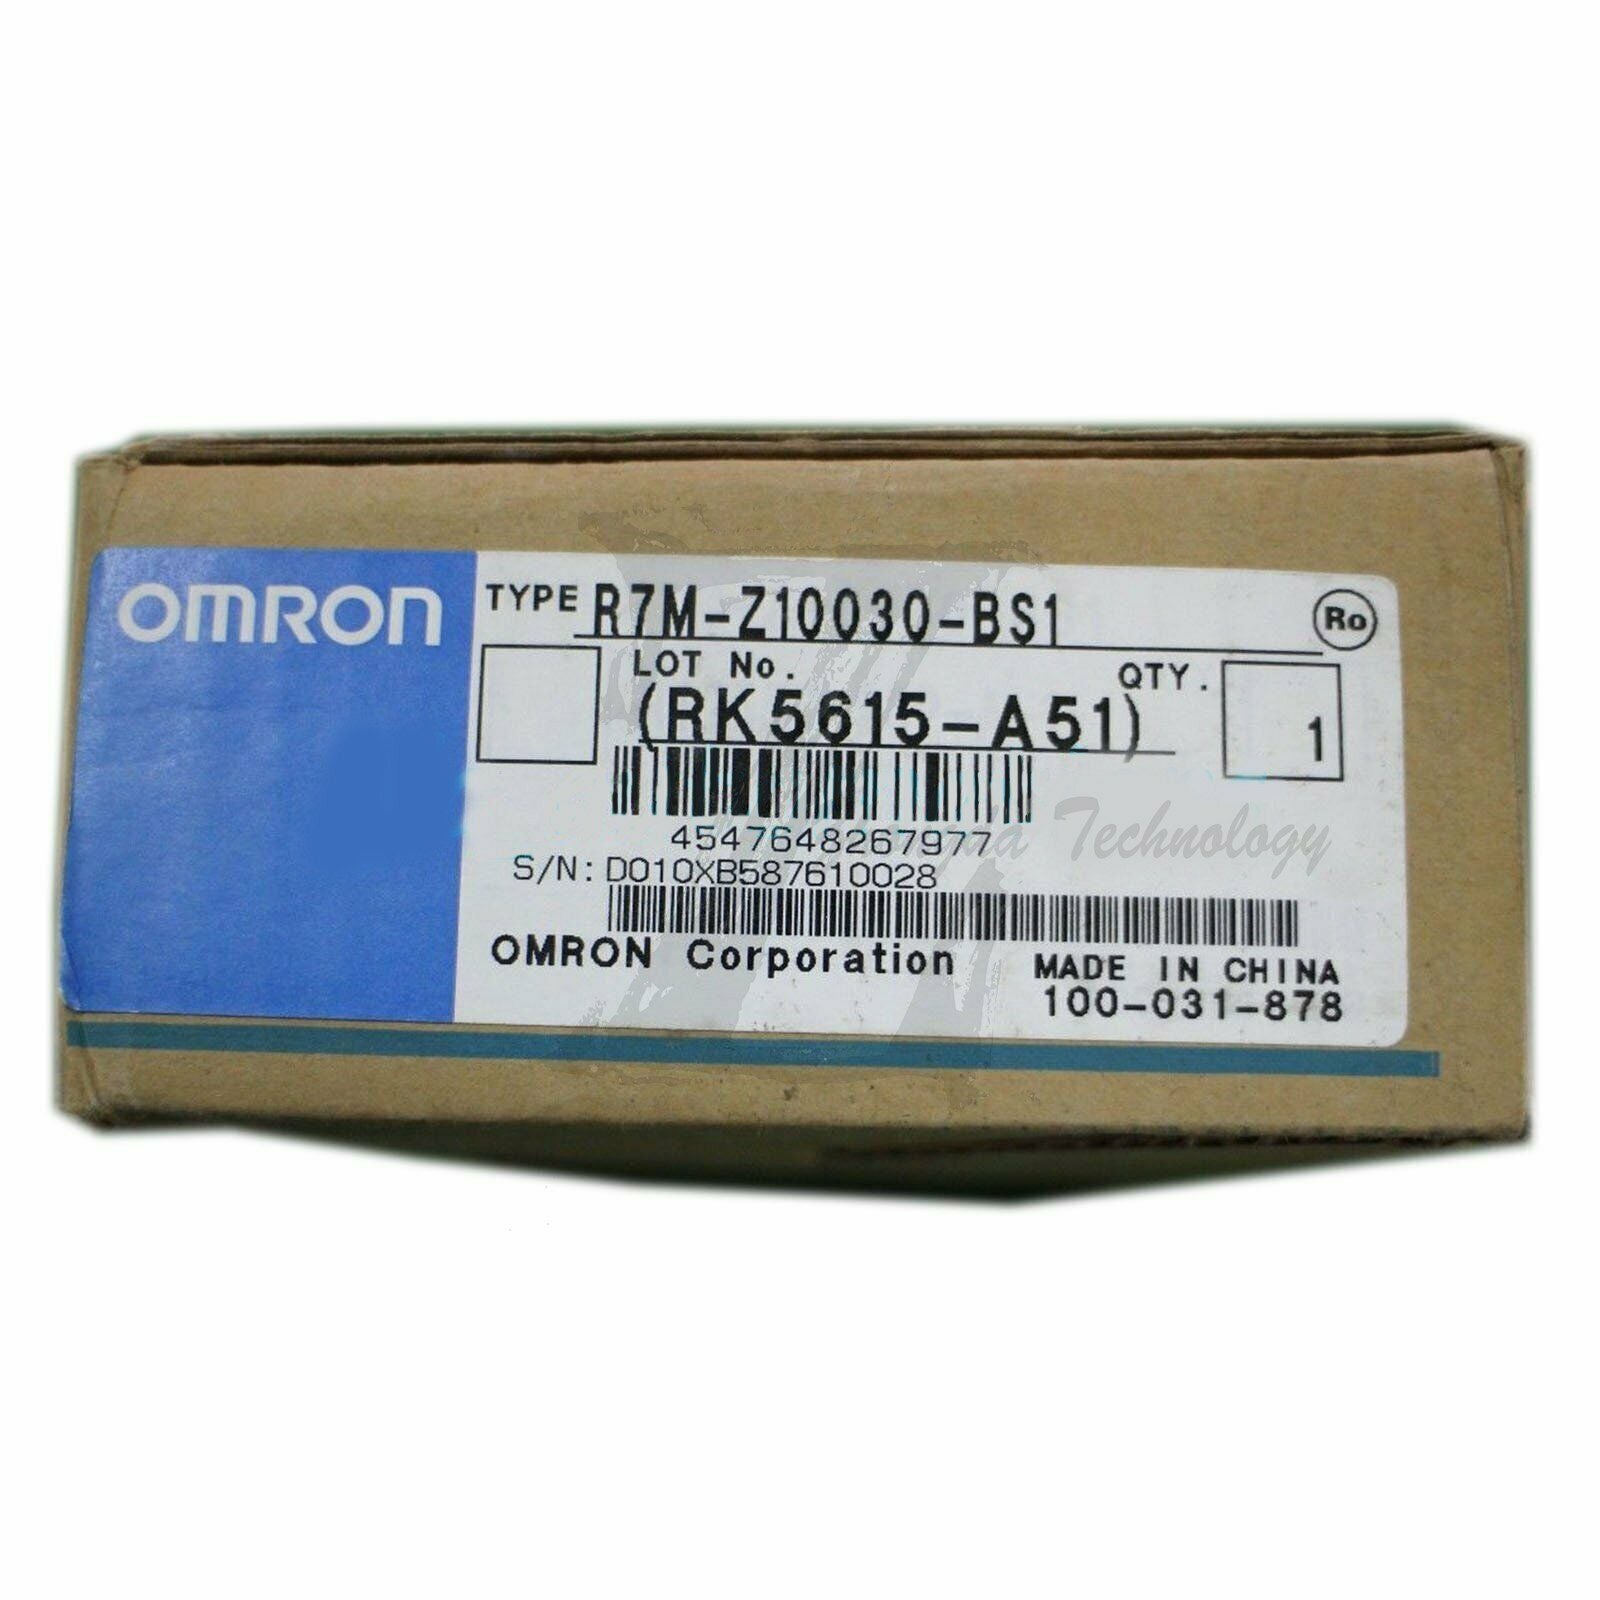 1Pc new Omron R7M-Z10030-BS1 one-year warranty KOEED 500+, 90%, import_2020_10_10_031751, Omron, Other